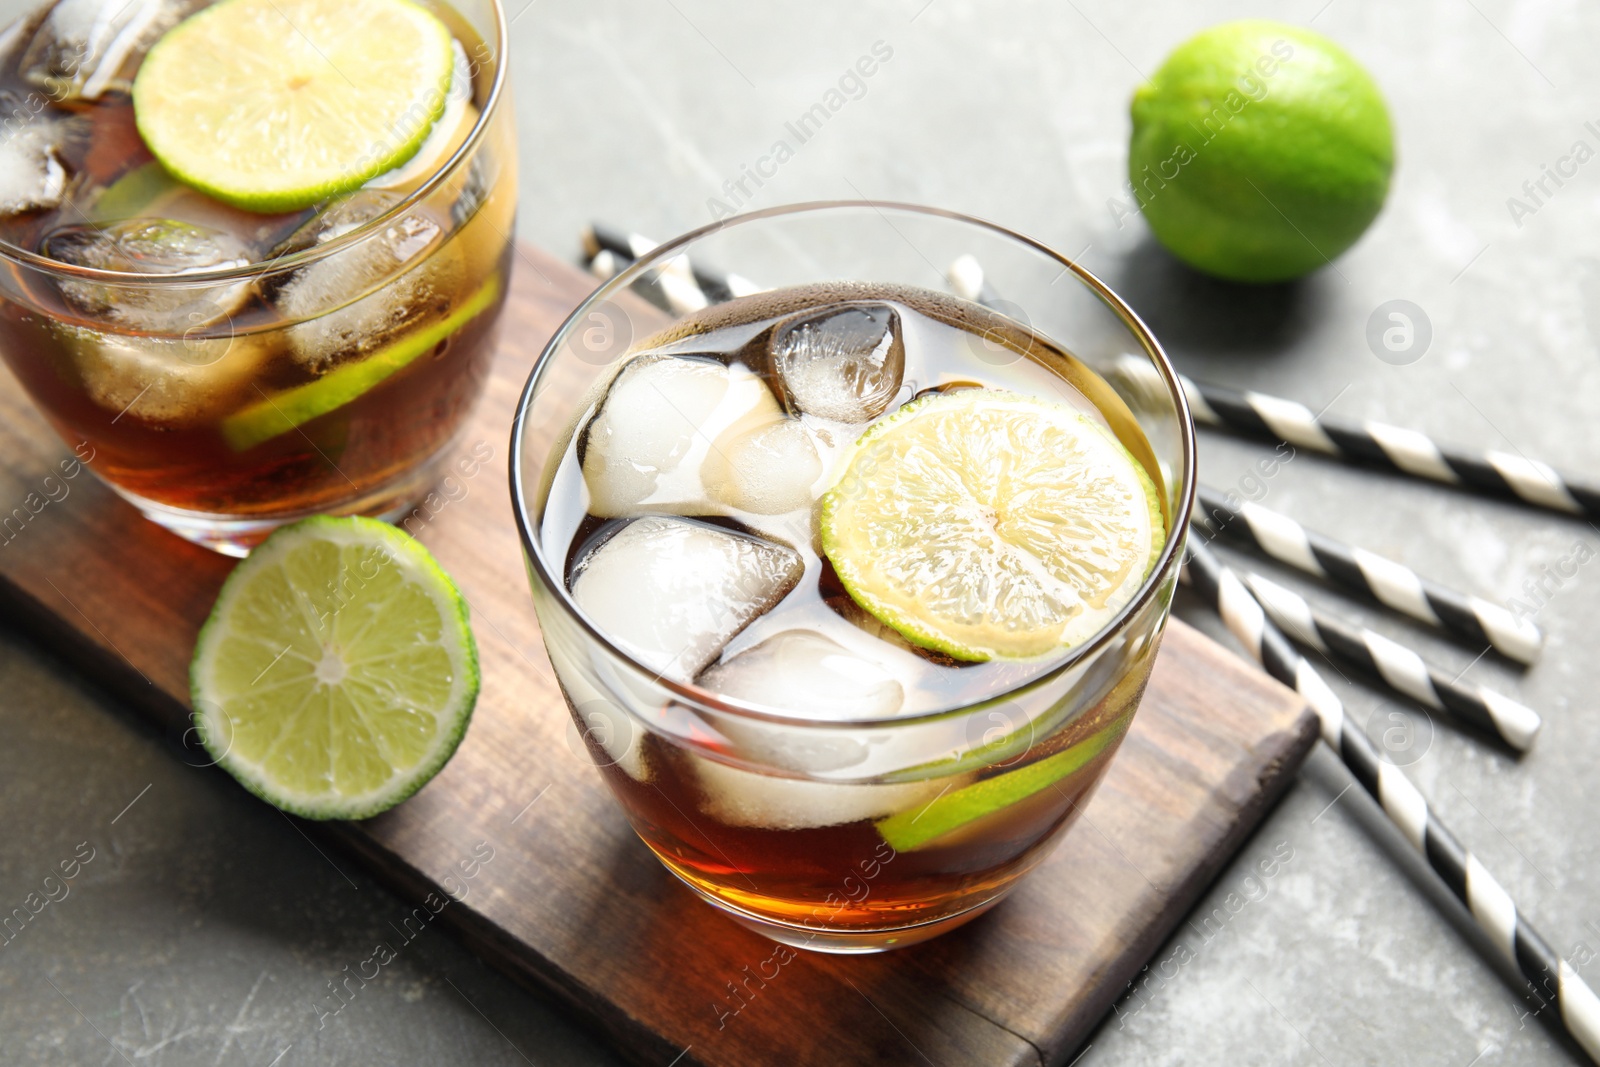 Photo of Glasses of cocktail with cola, ice and cut lime on table